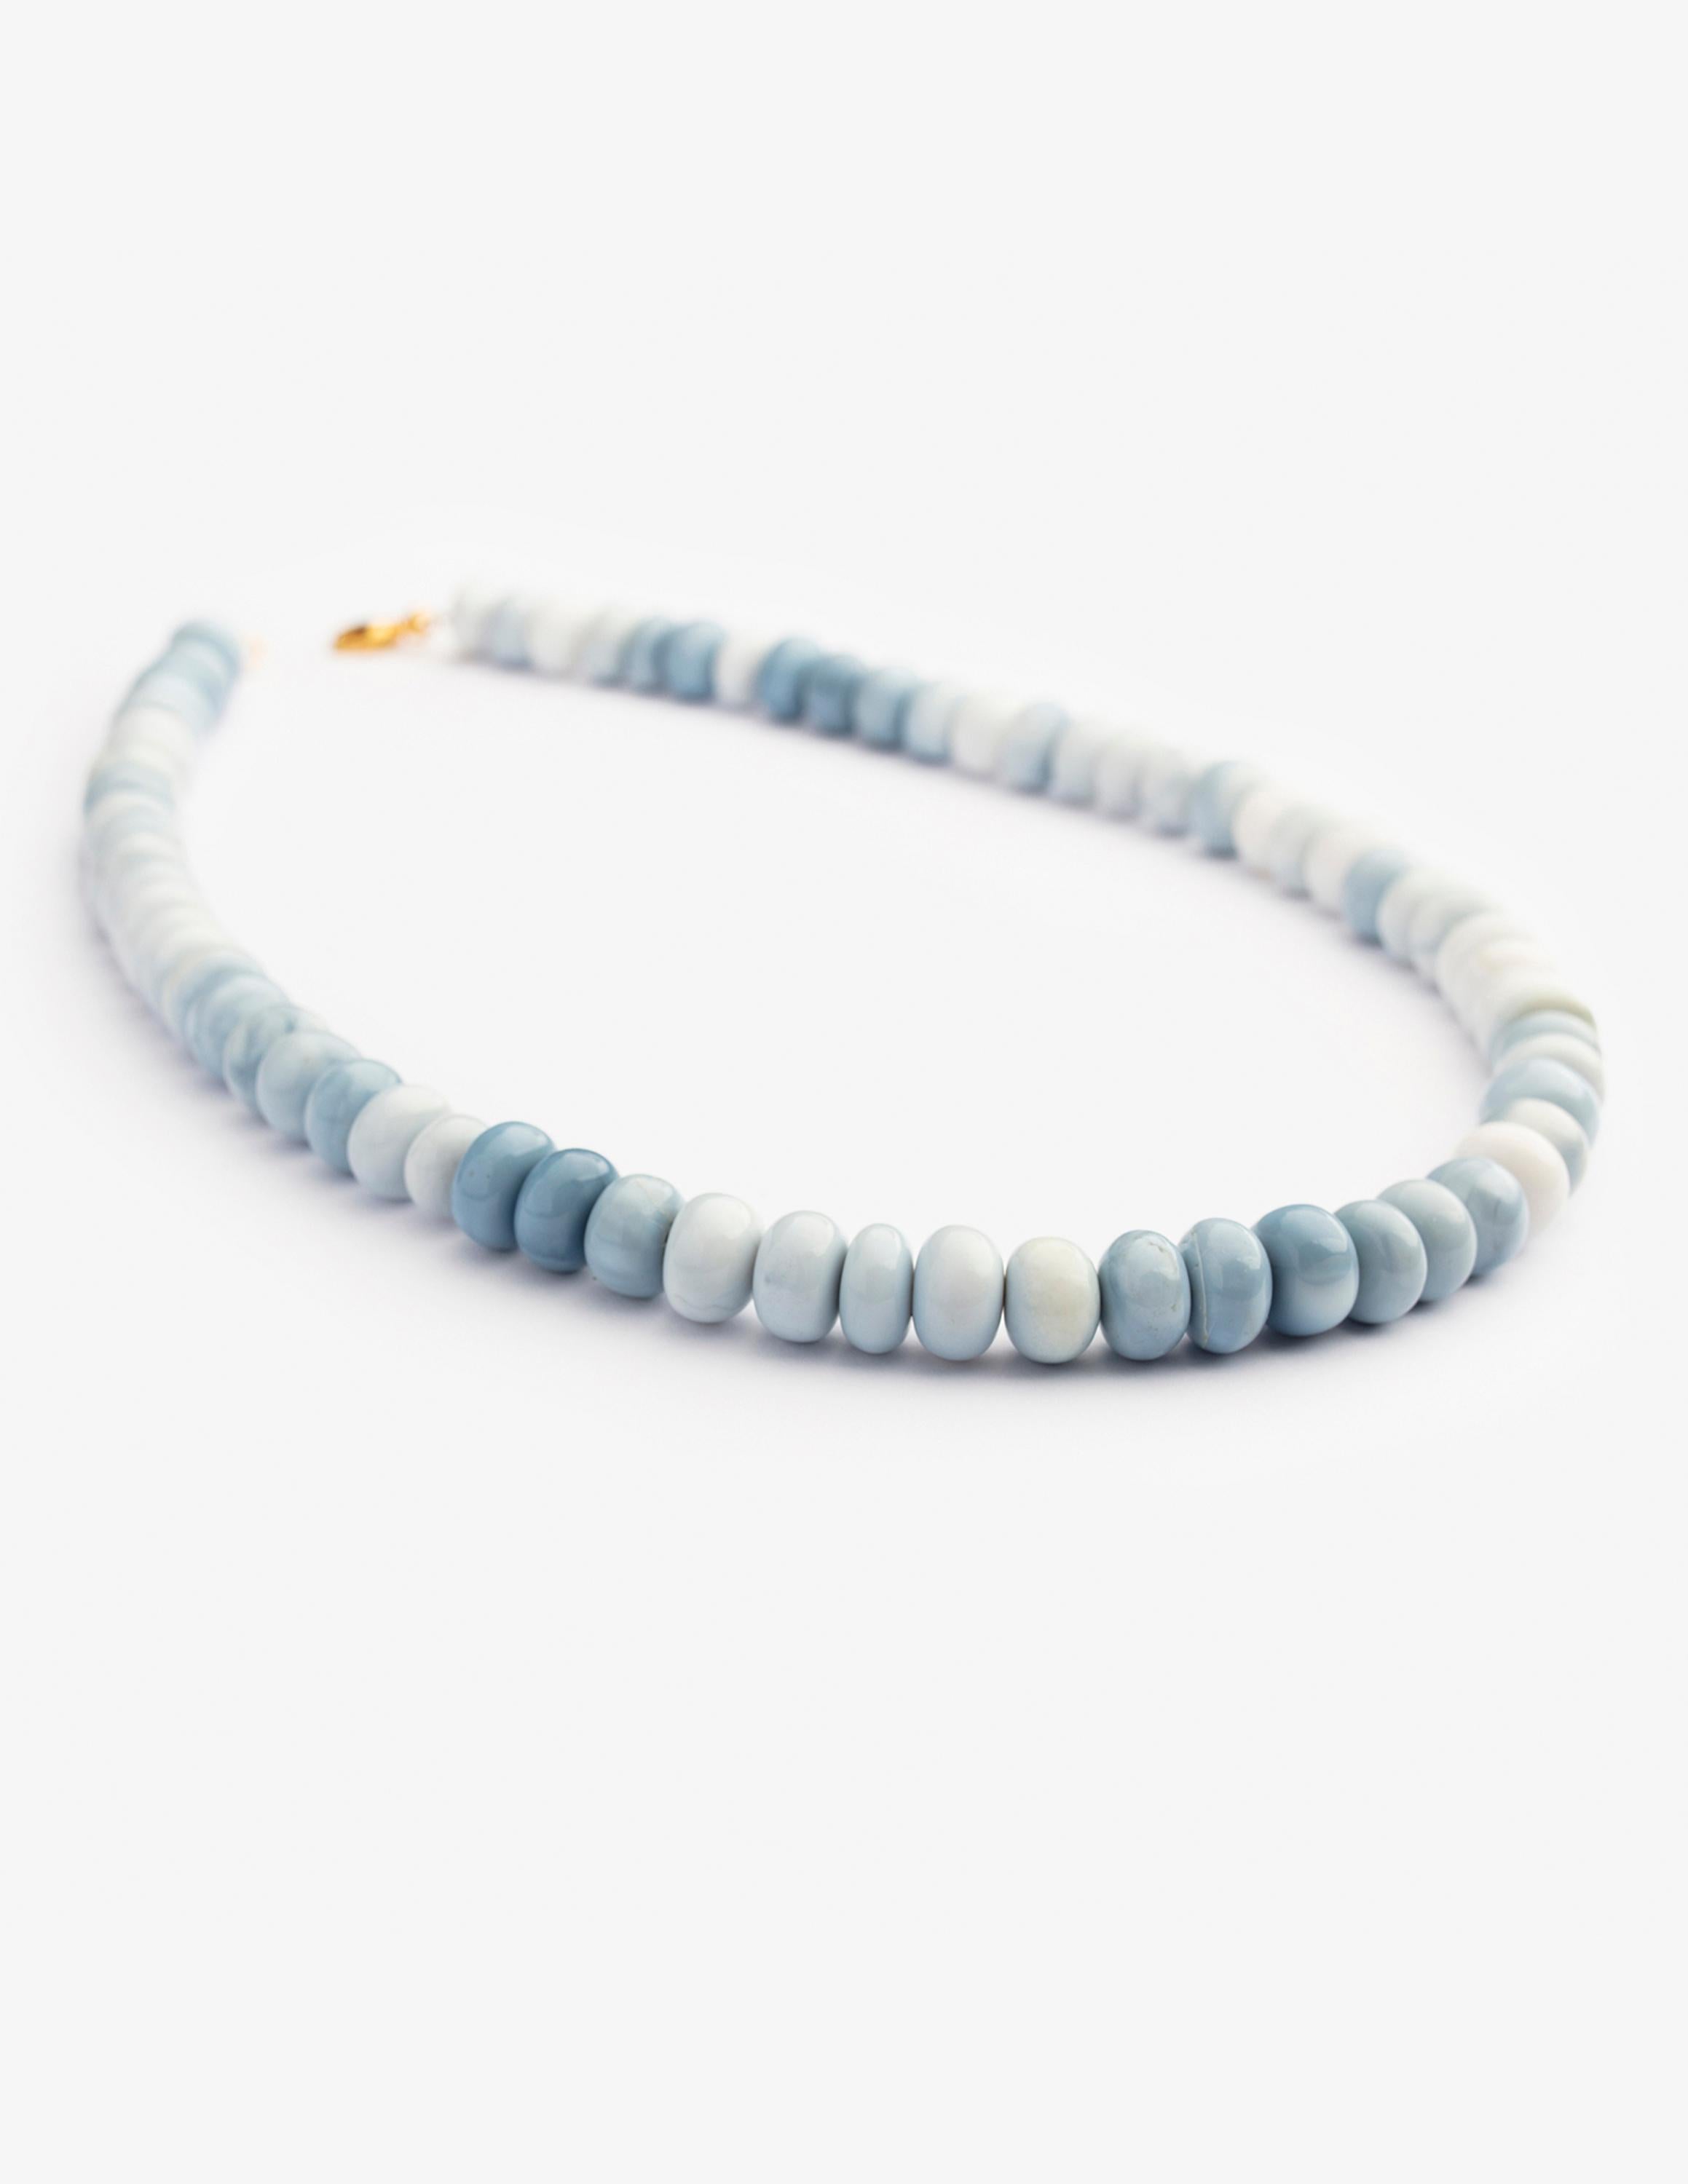 This elegant Blue Opal Necklace crafted out of very high quality.
The stones which in this necklace are in rondelle cut. This necklace is very striking on its own and complements your combinations. This necklace provides fashionable, luxury  and